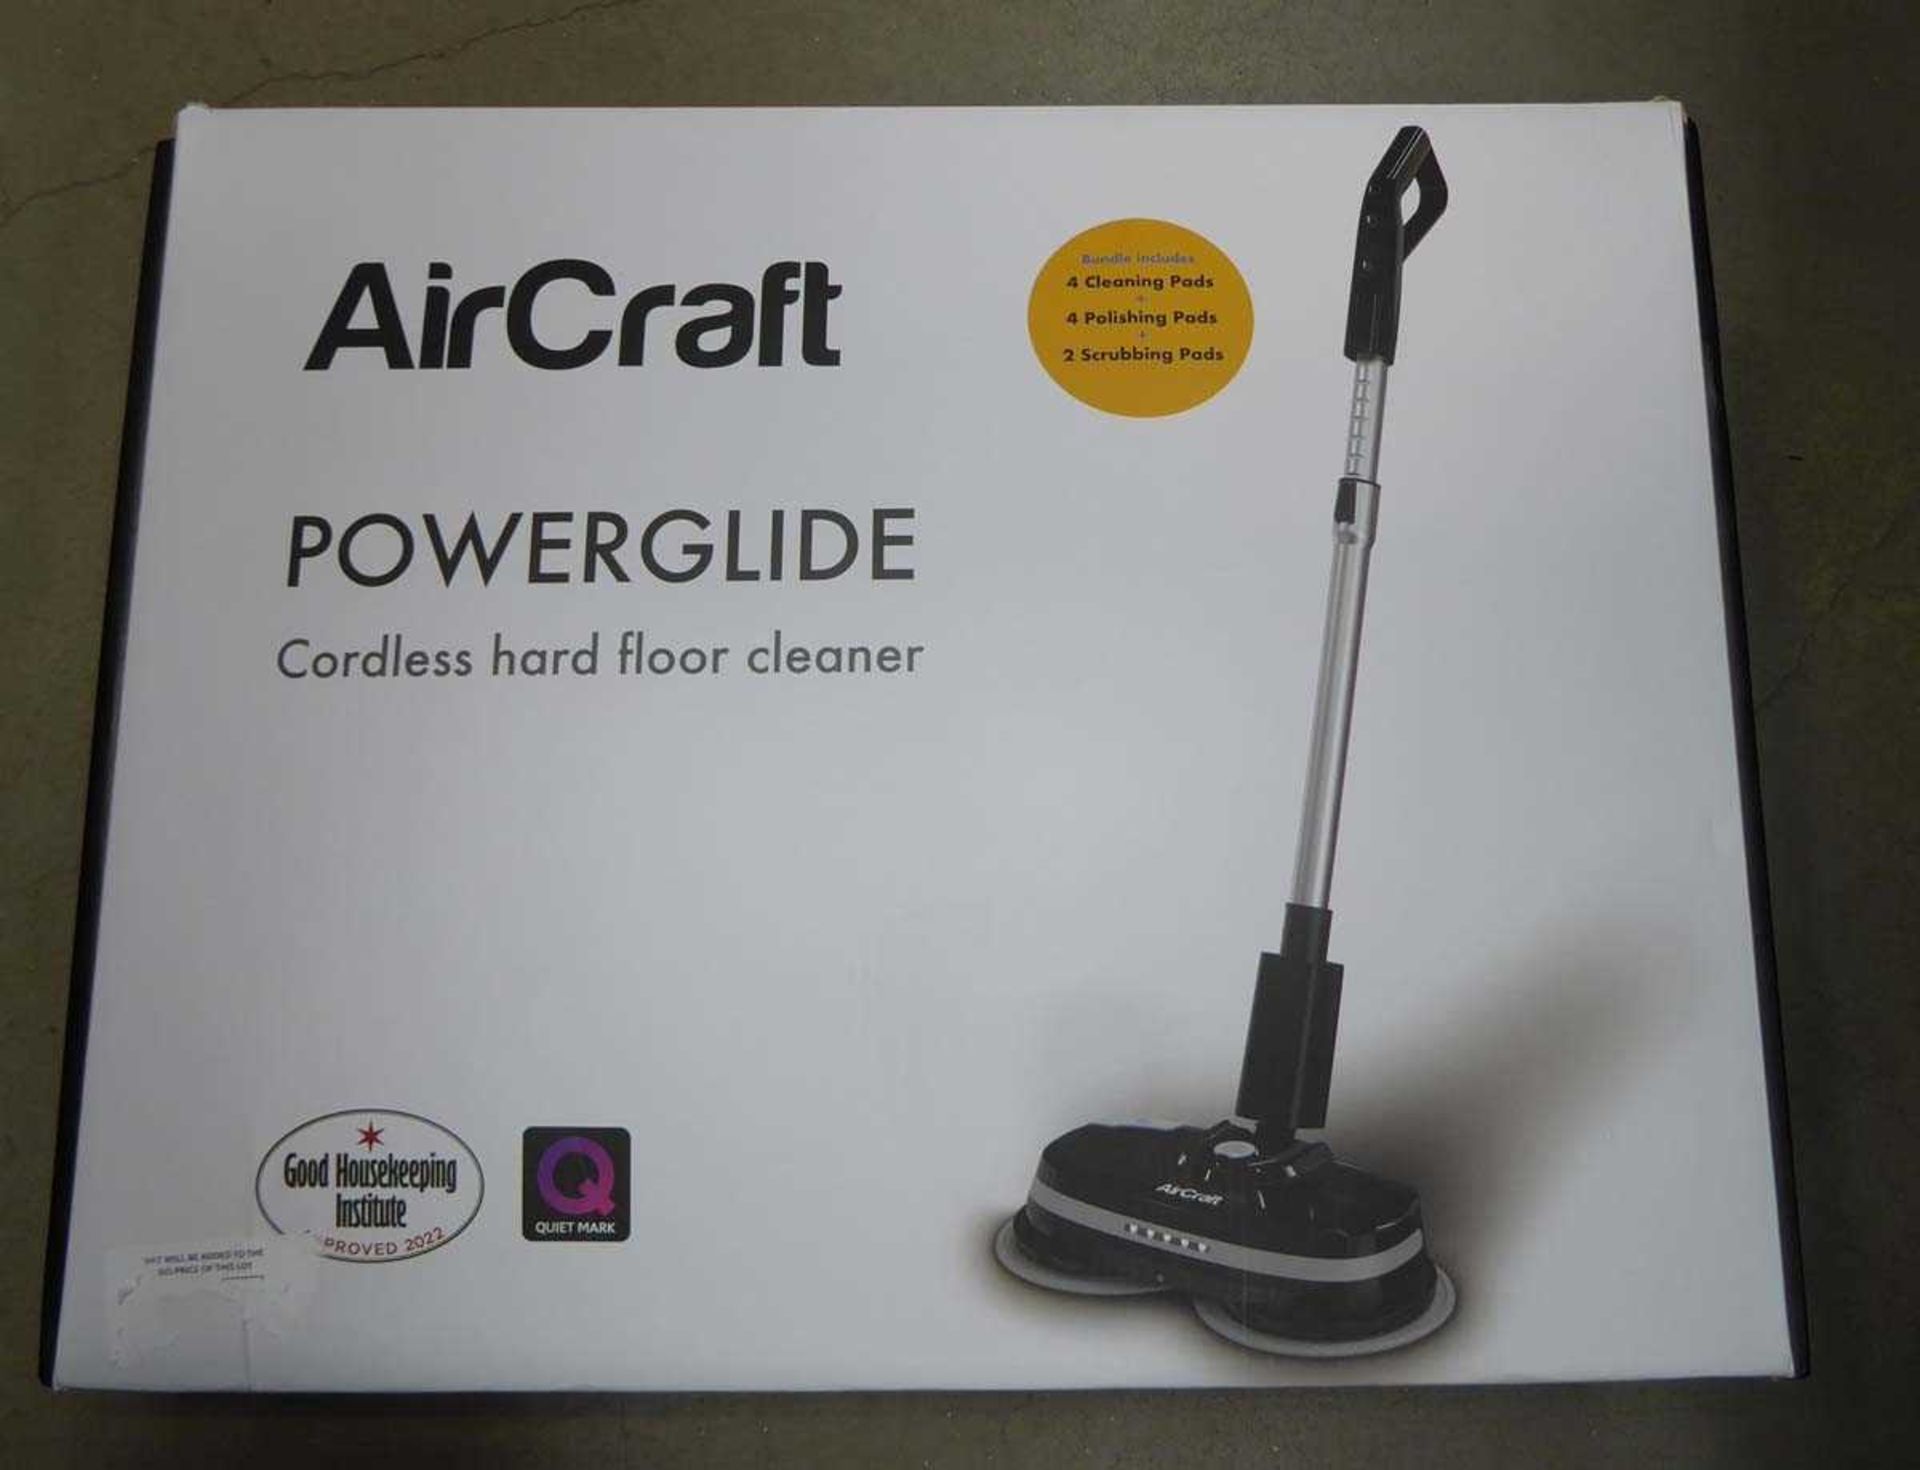 Aircraft powerglide cordless hard floor cleaner